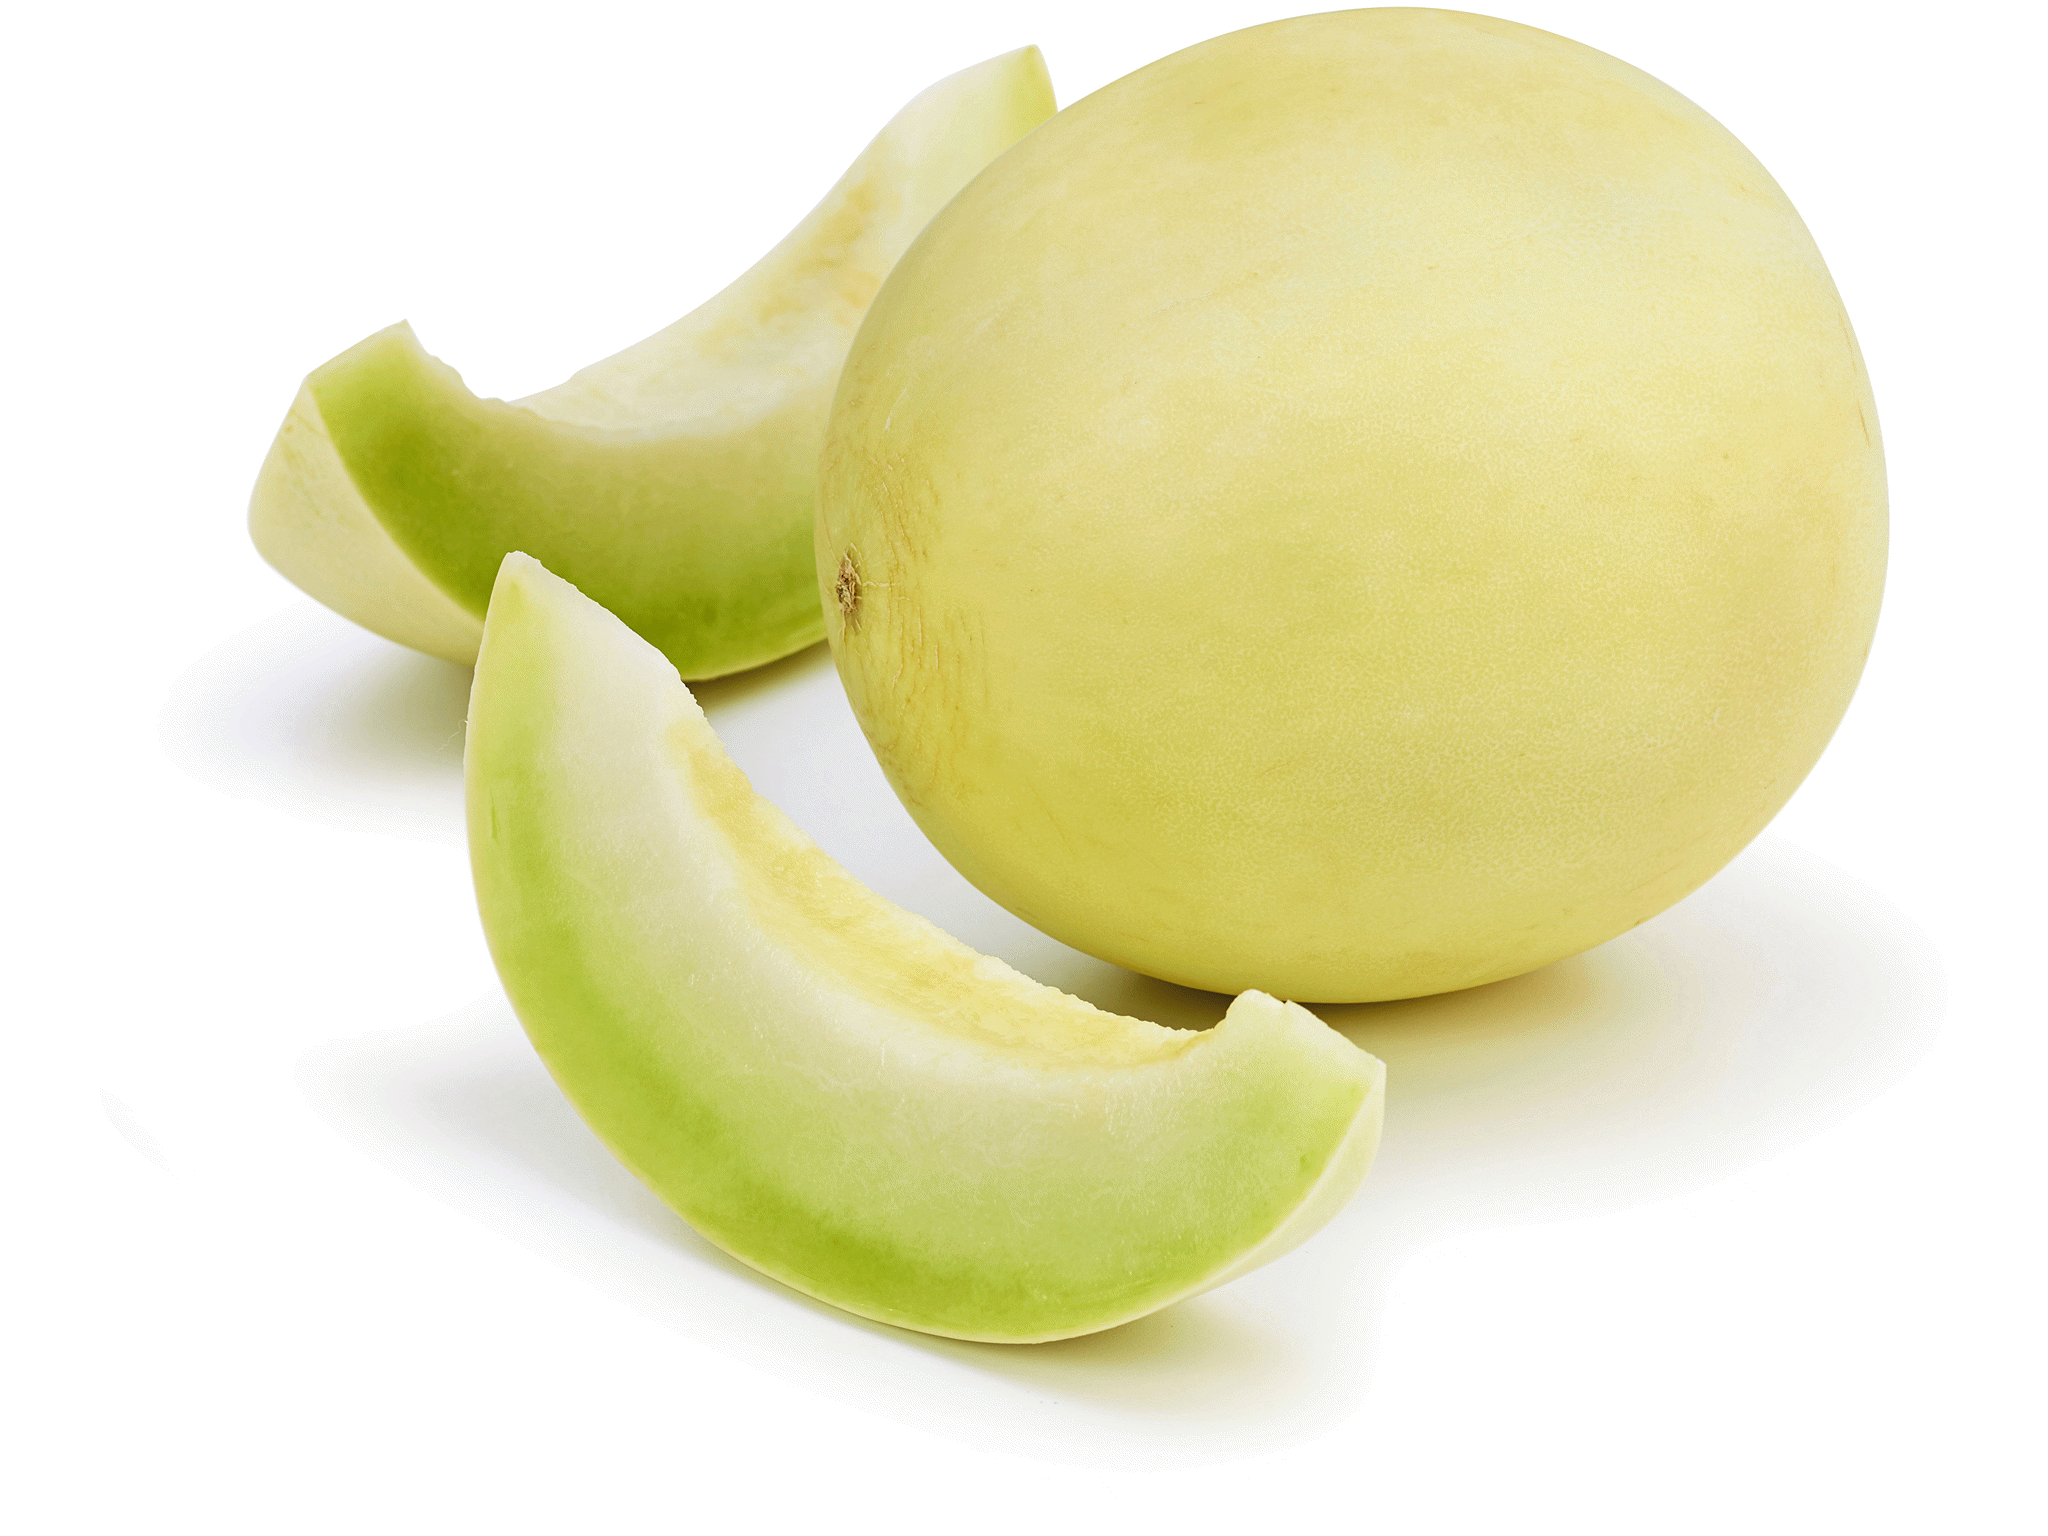 Honeydew Western Veg Pro Inc Fruit And Vegetable Growers And Shippers